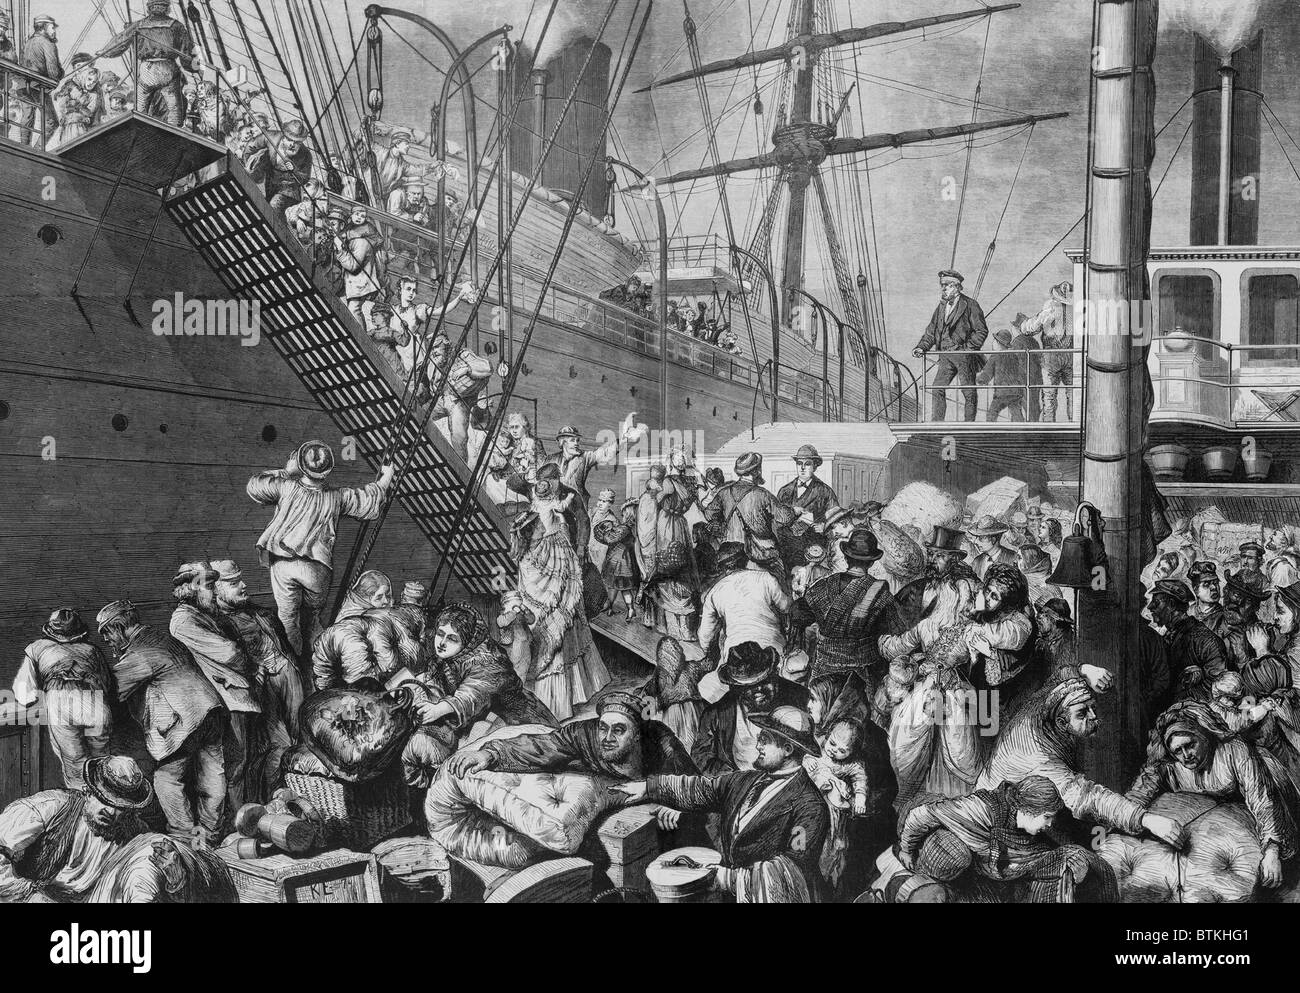 German emigrants for New York embarking on a Hamburg steamer in 1874. German emigration to the